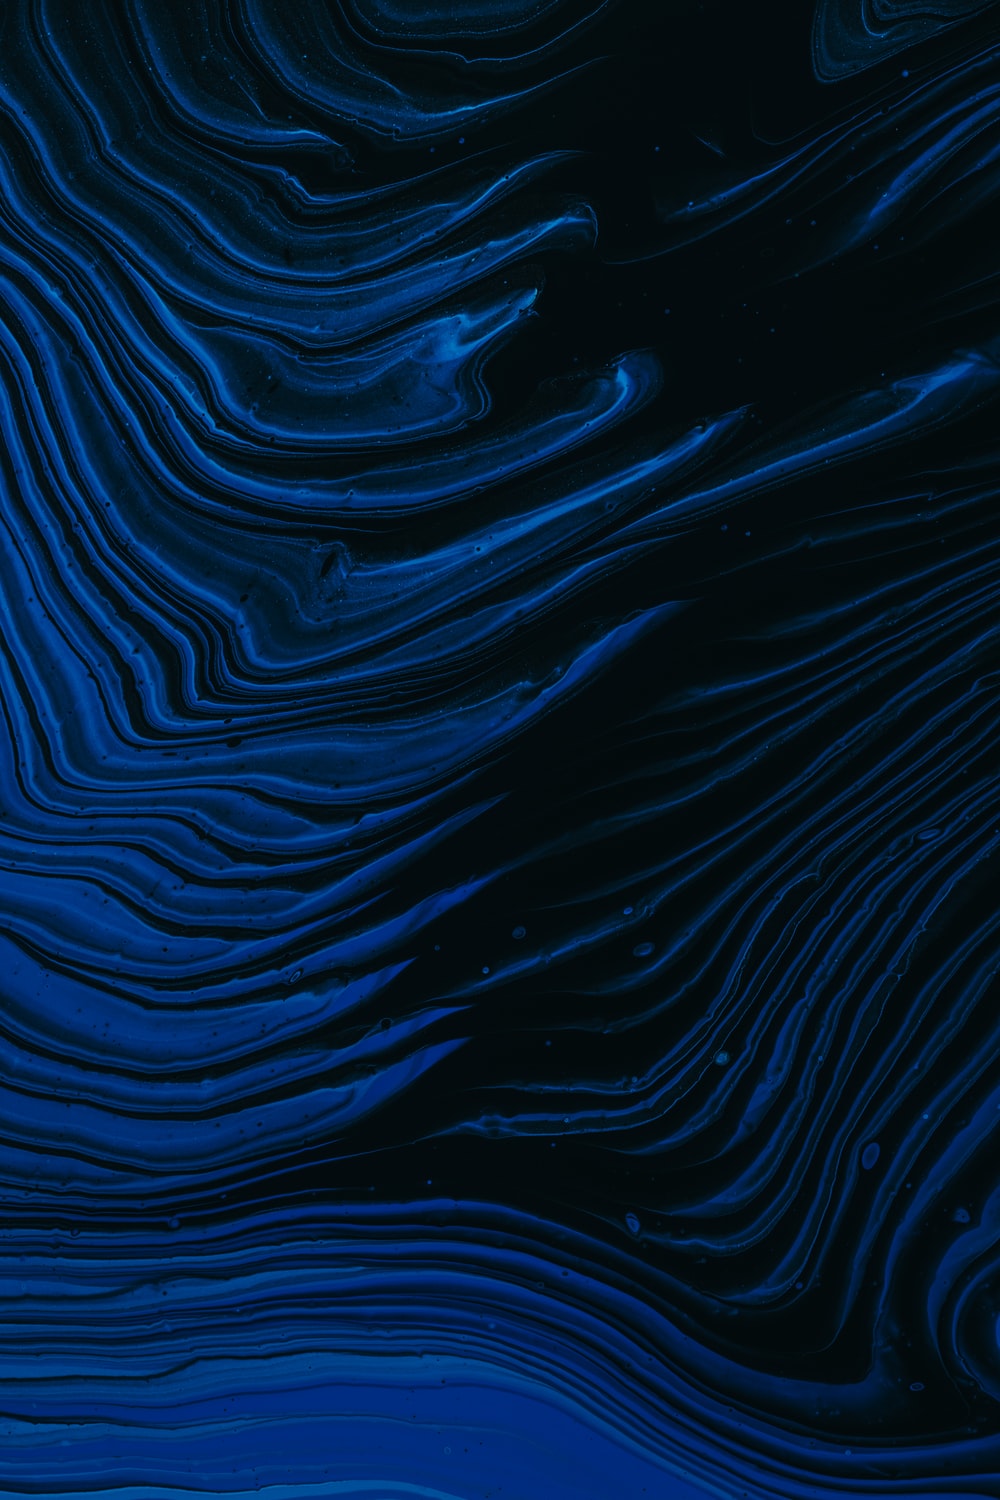 Dark Blue Texture Picture. Download Free Image